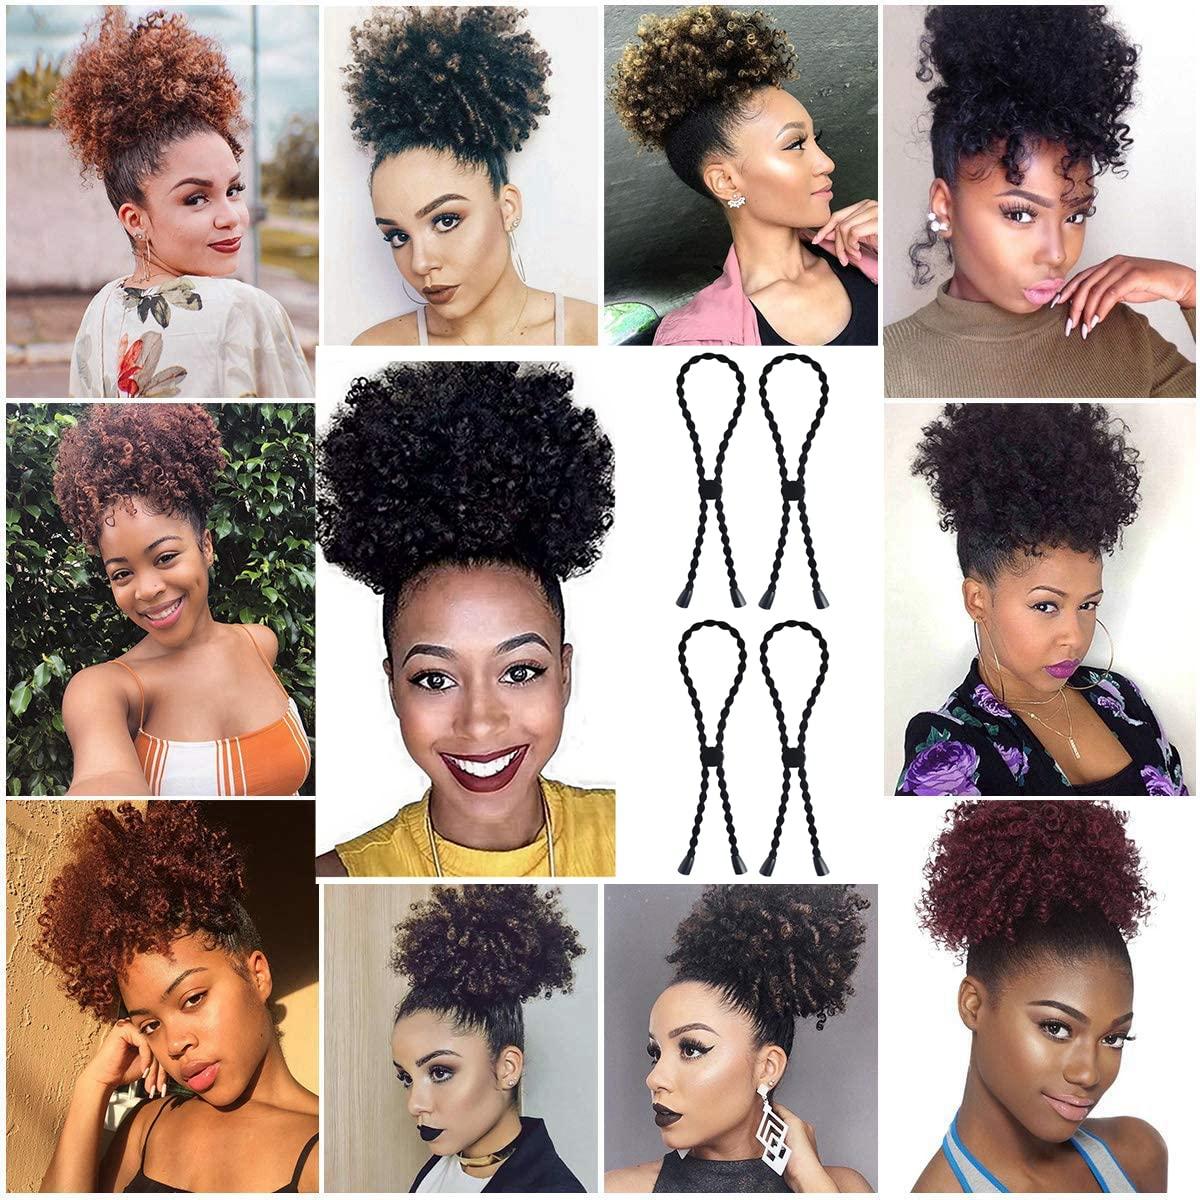 How To Trim Your Curly Natural Hair At Home Best Tips